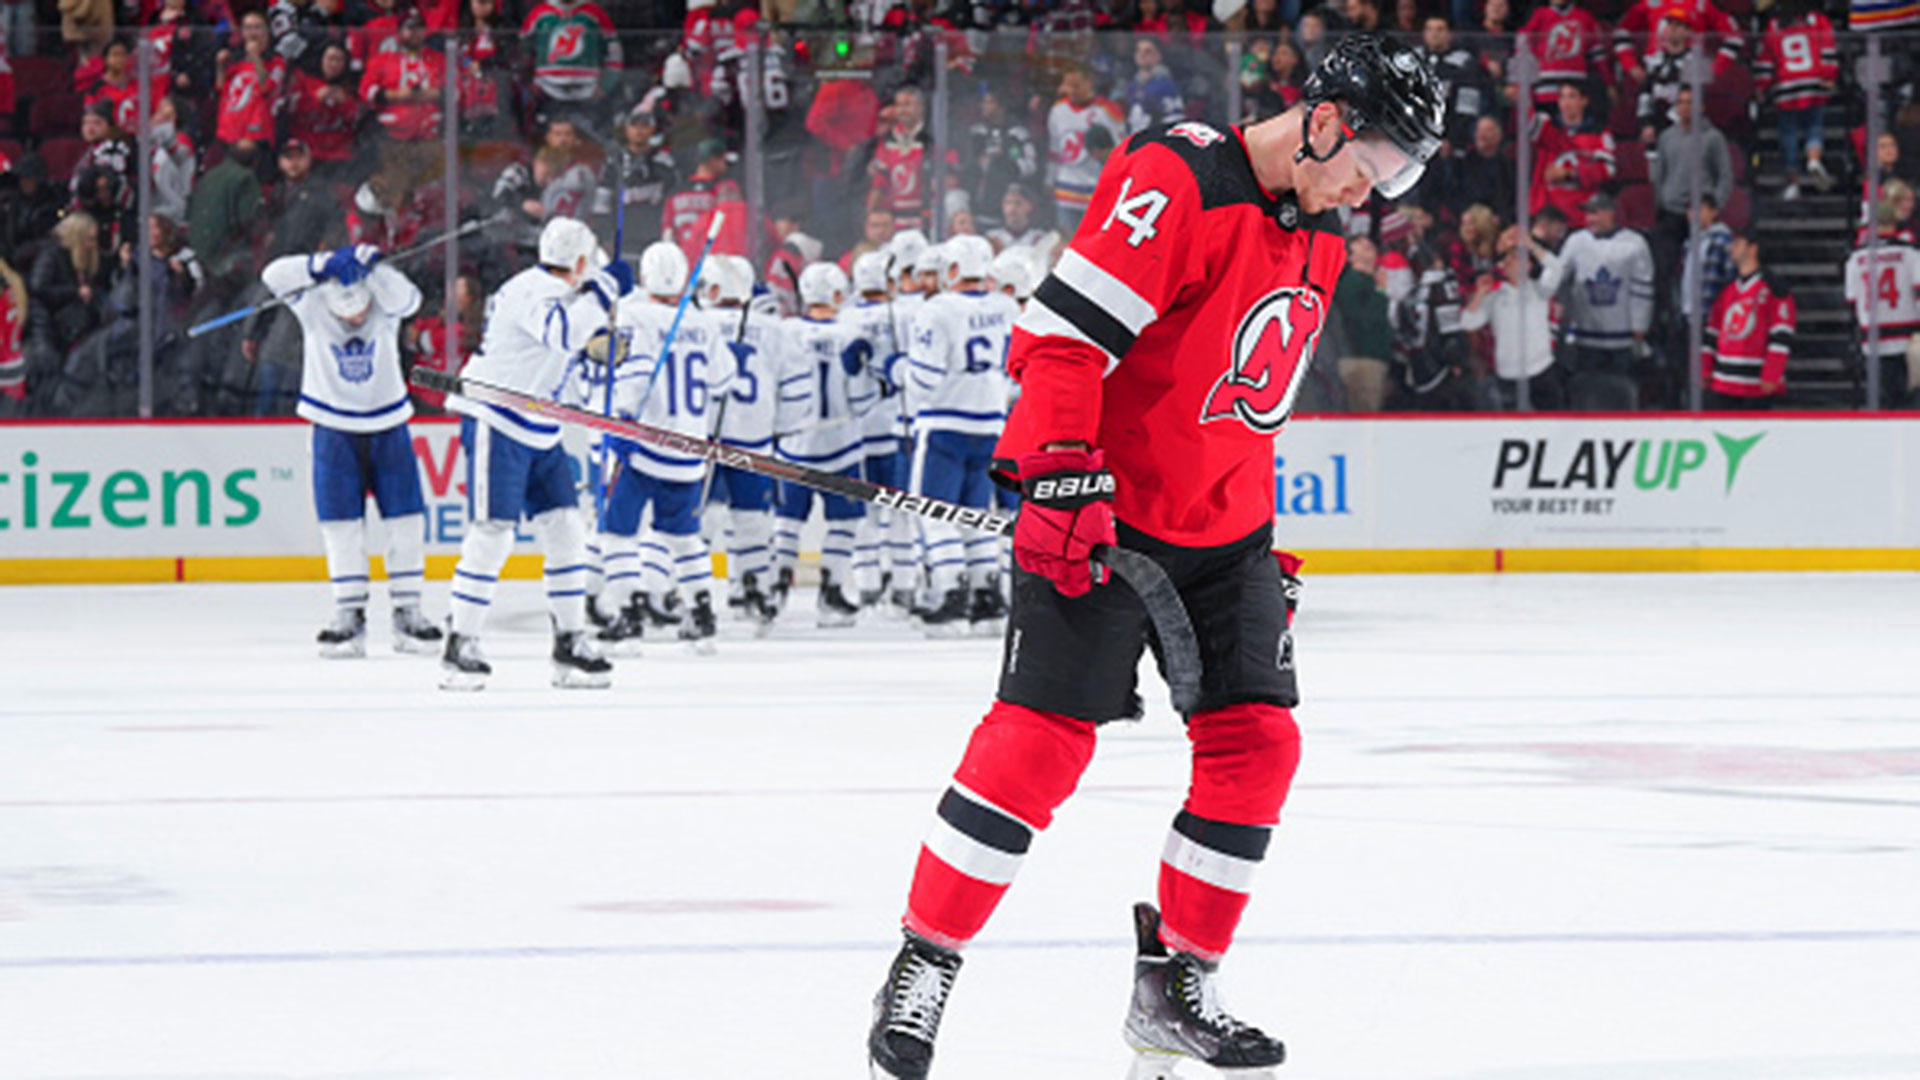 The Devils win streak ends in disastrous fashion as three goals are called back in 2-1 loss.